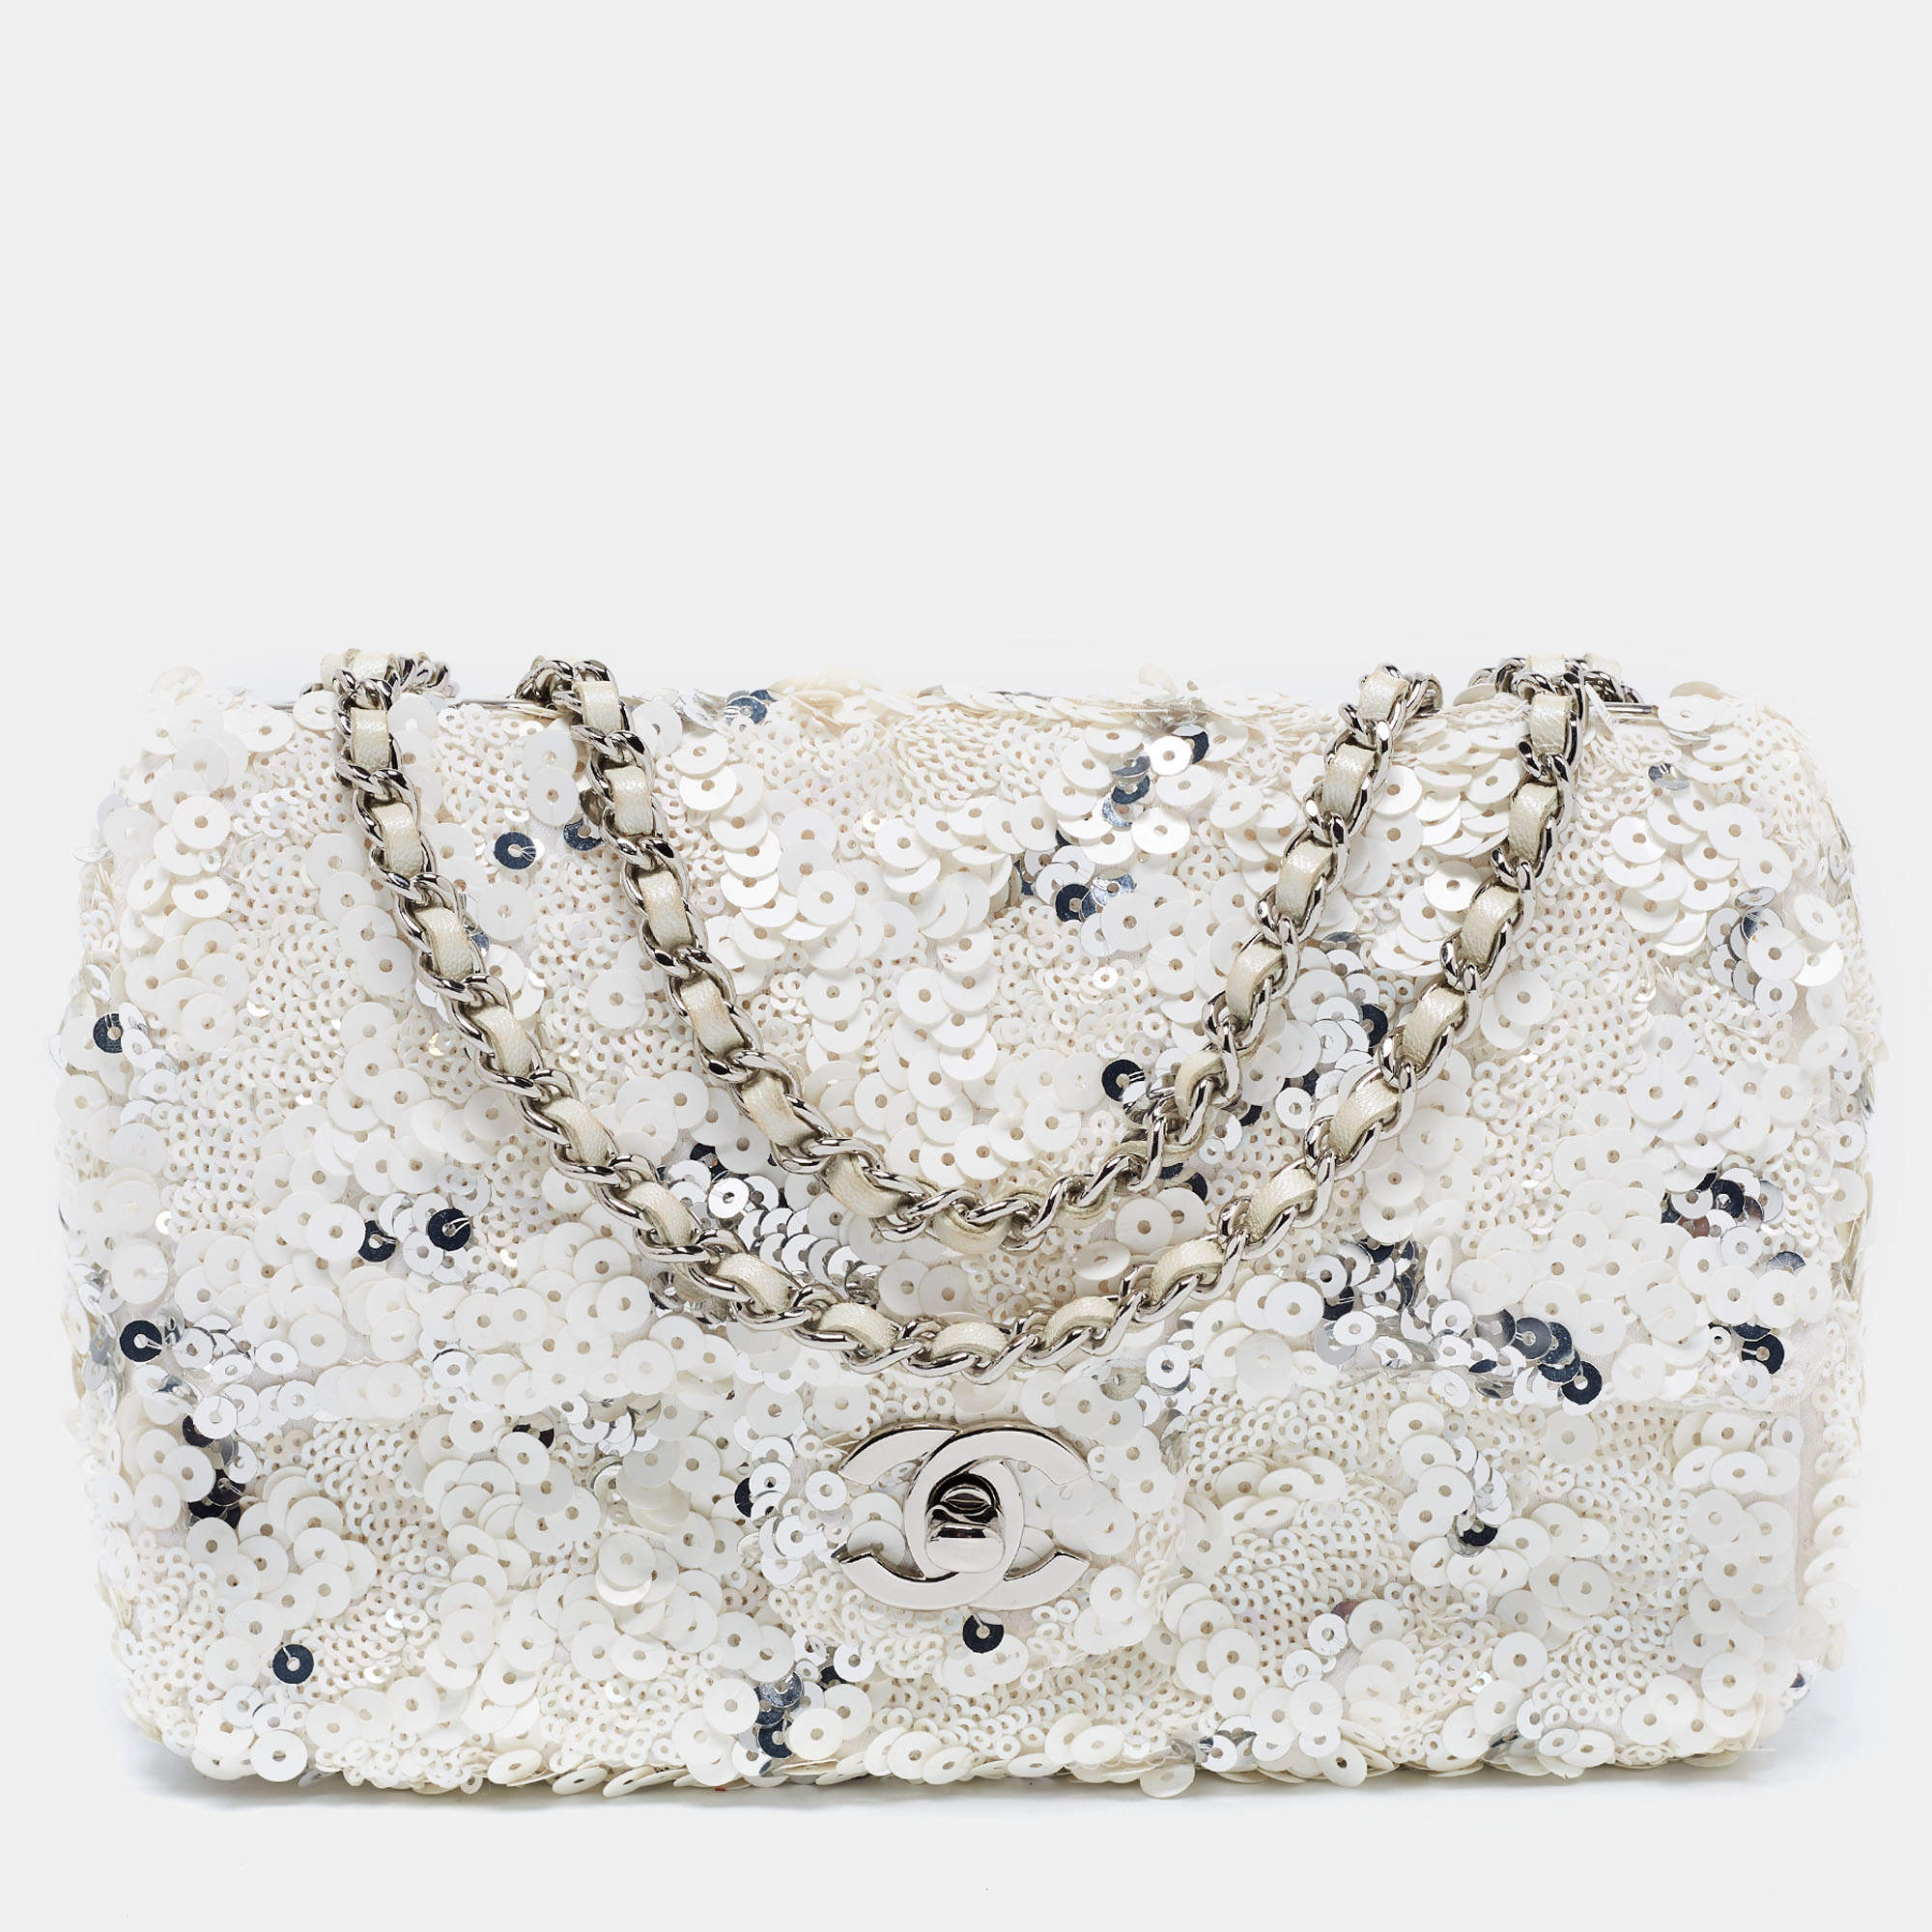 Chanel White Sequins Small Classic Flap Bag Chanel